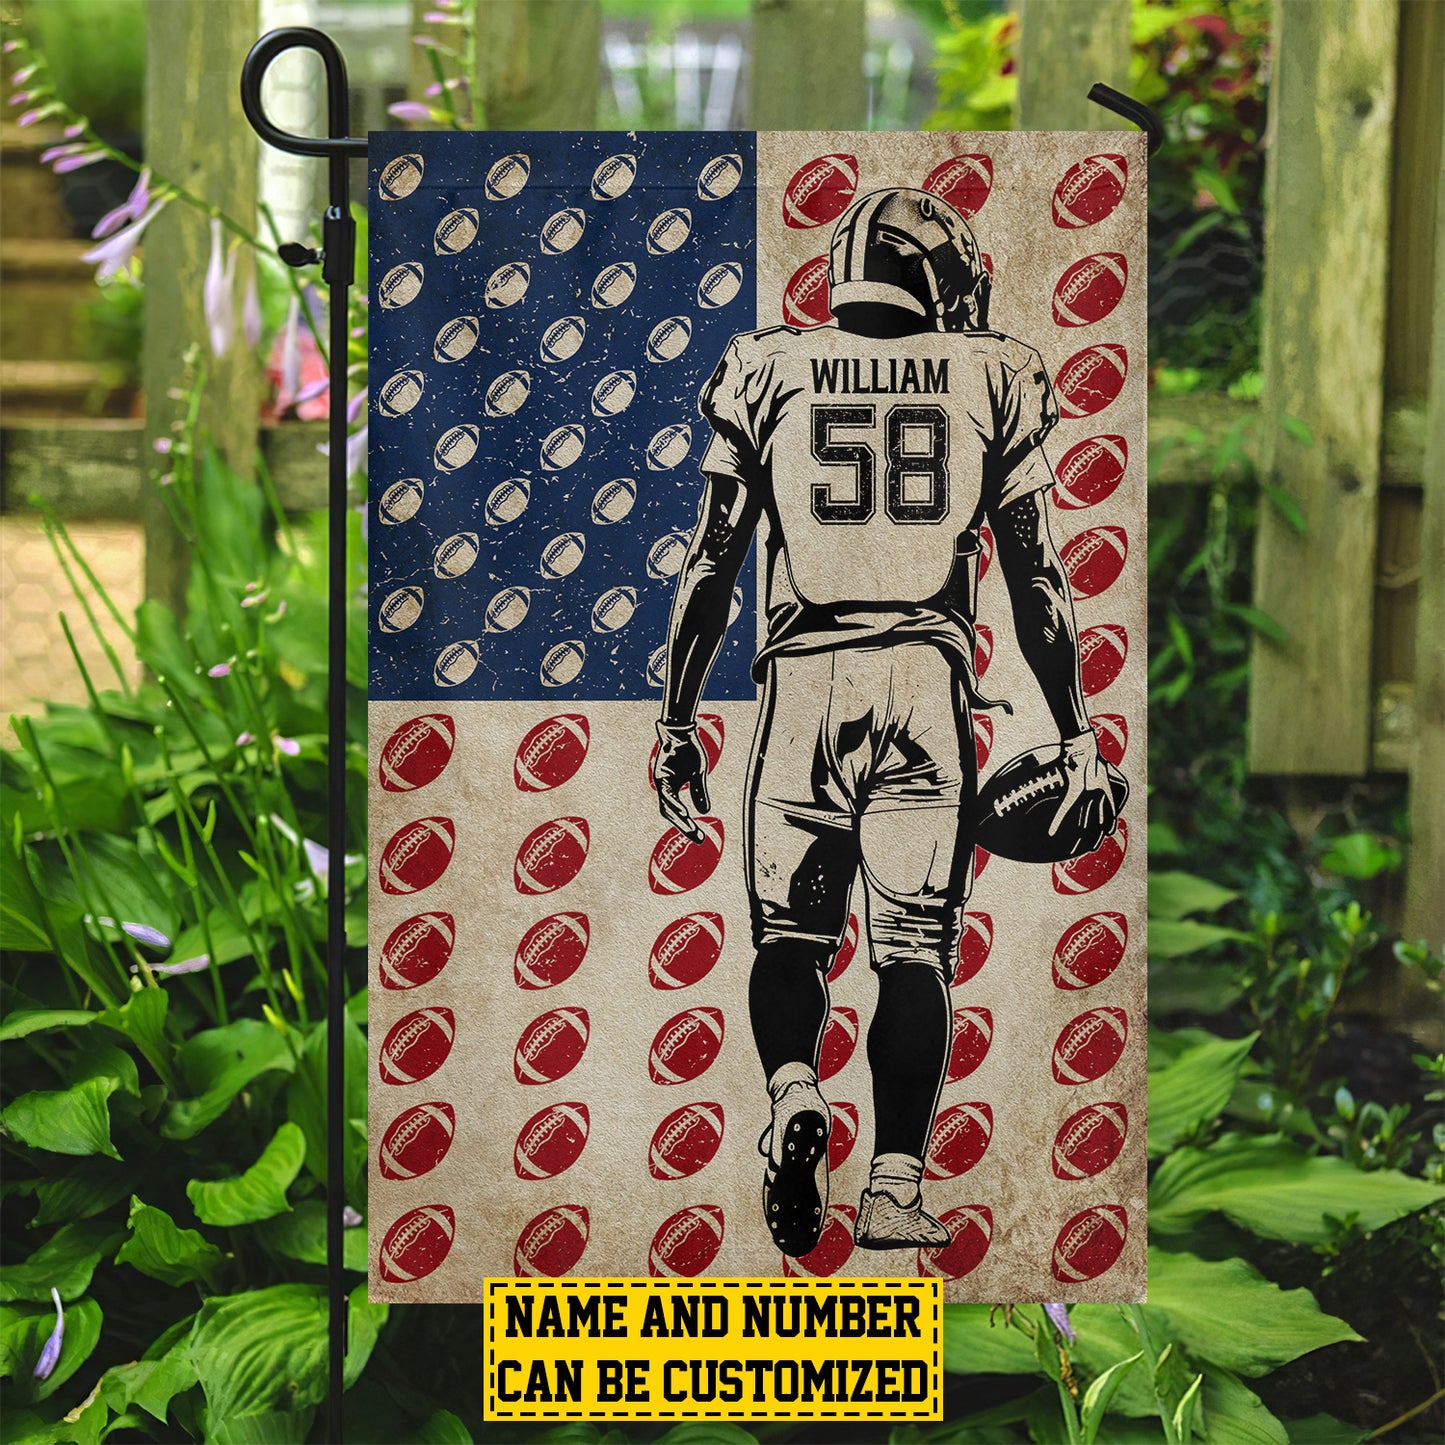 Personalized Independence Day Football Boy Garden Flag House Flag, July 4th Yard Flag Gift For Football Lovers, Football Players